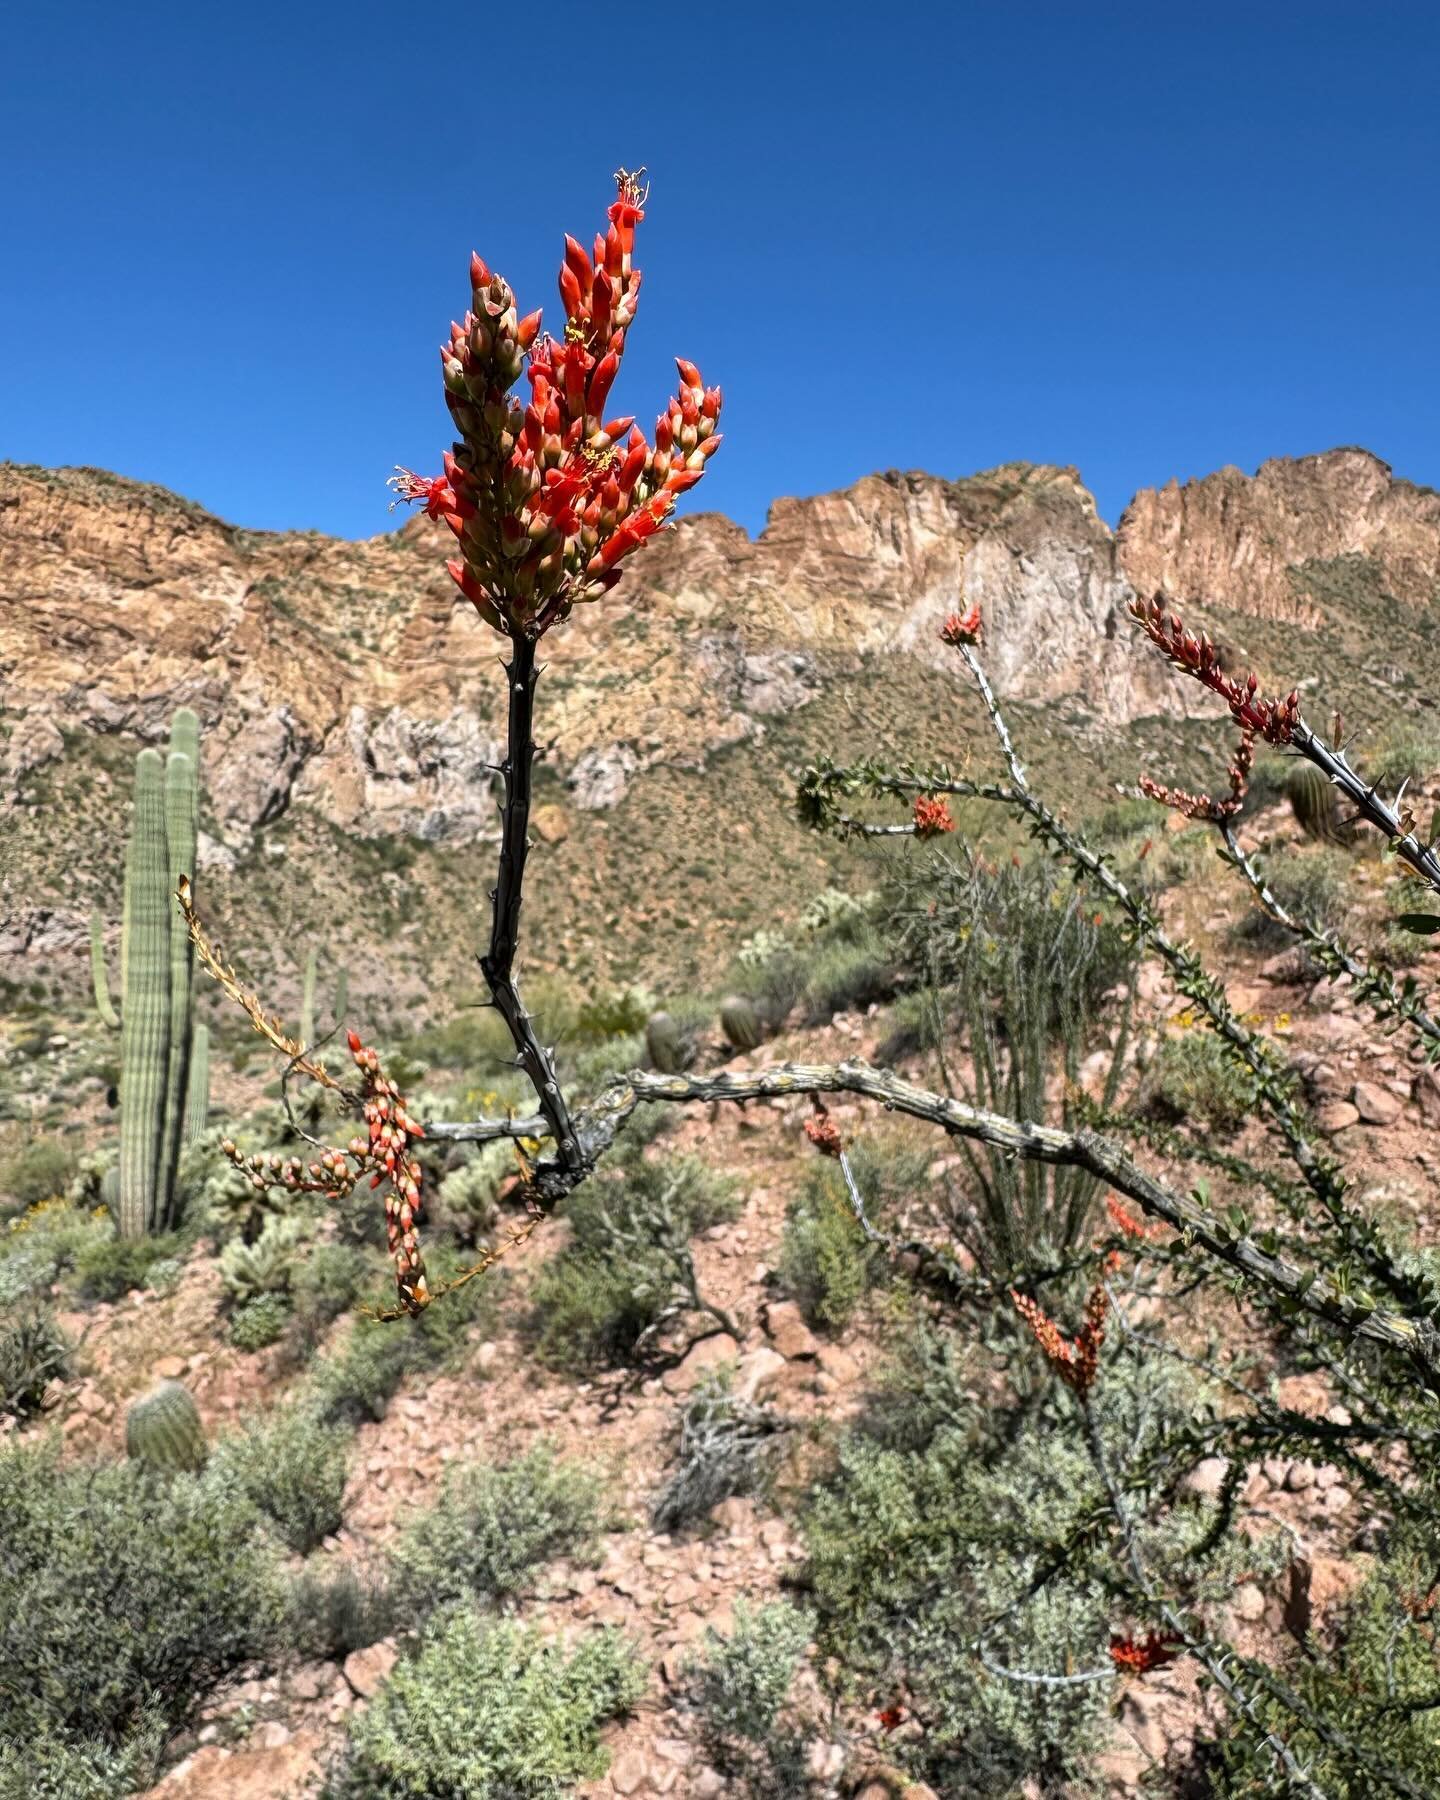 I got an ocotillo tattooed on my stomach in 2020 because I was emotionally eviscerated. 

I got an ocotillo tattooed on my stomach in 2020 because it is the beautiful boundaries plant. hard, mostly. Hard and soft, sometimes. 

I got an ocotillo tatto